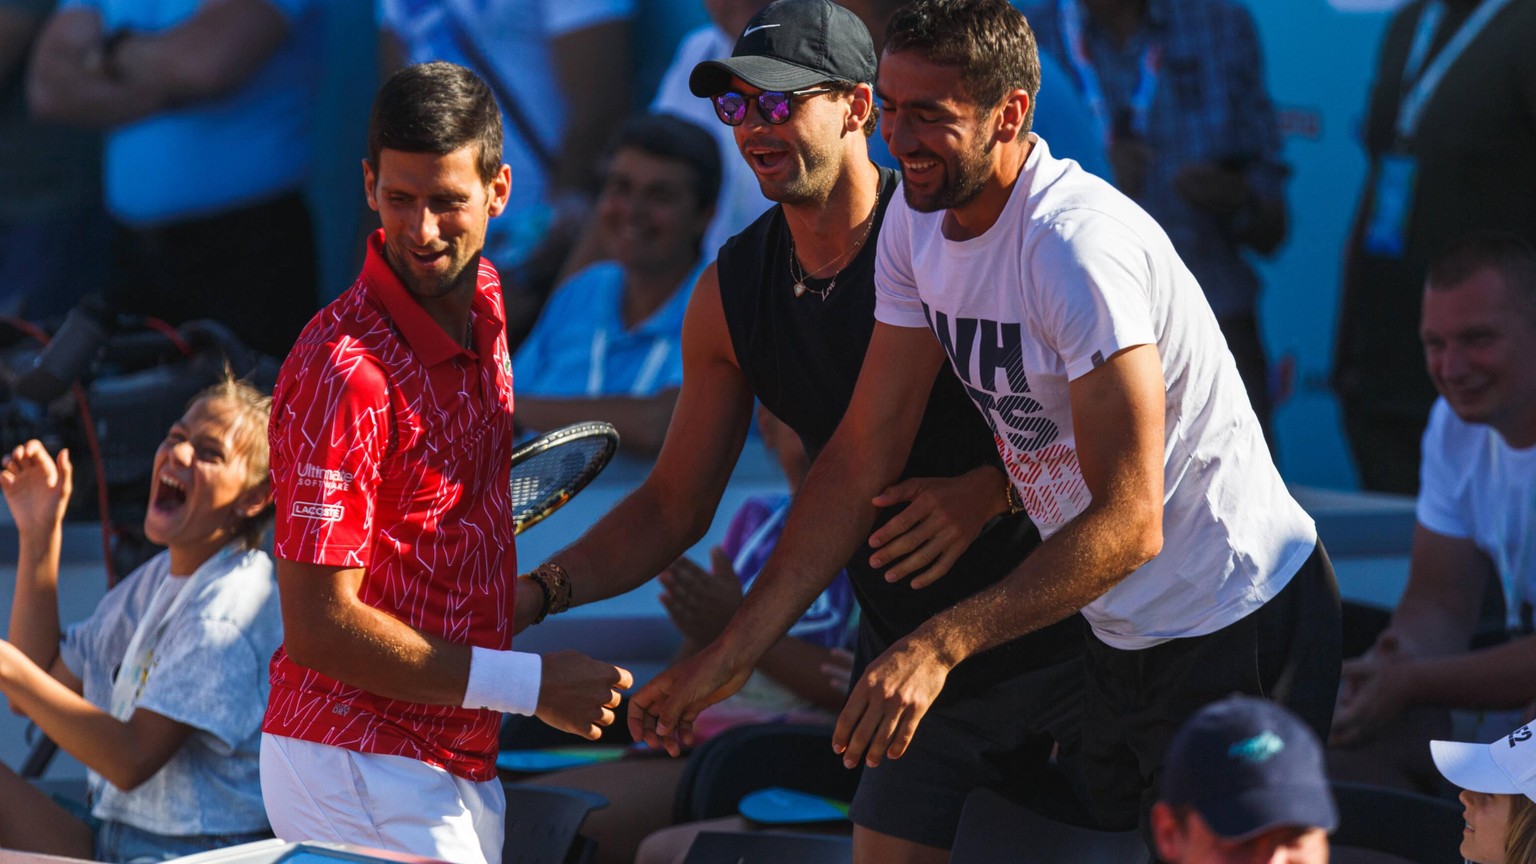 PXLExhibition match 19.06.2020., Zadar, Croatia - The grand opening of the humanitarian tennis tournament Adria Tour began with Novak Djokovic s exhibition match with Tours star. The main court, which ...